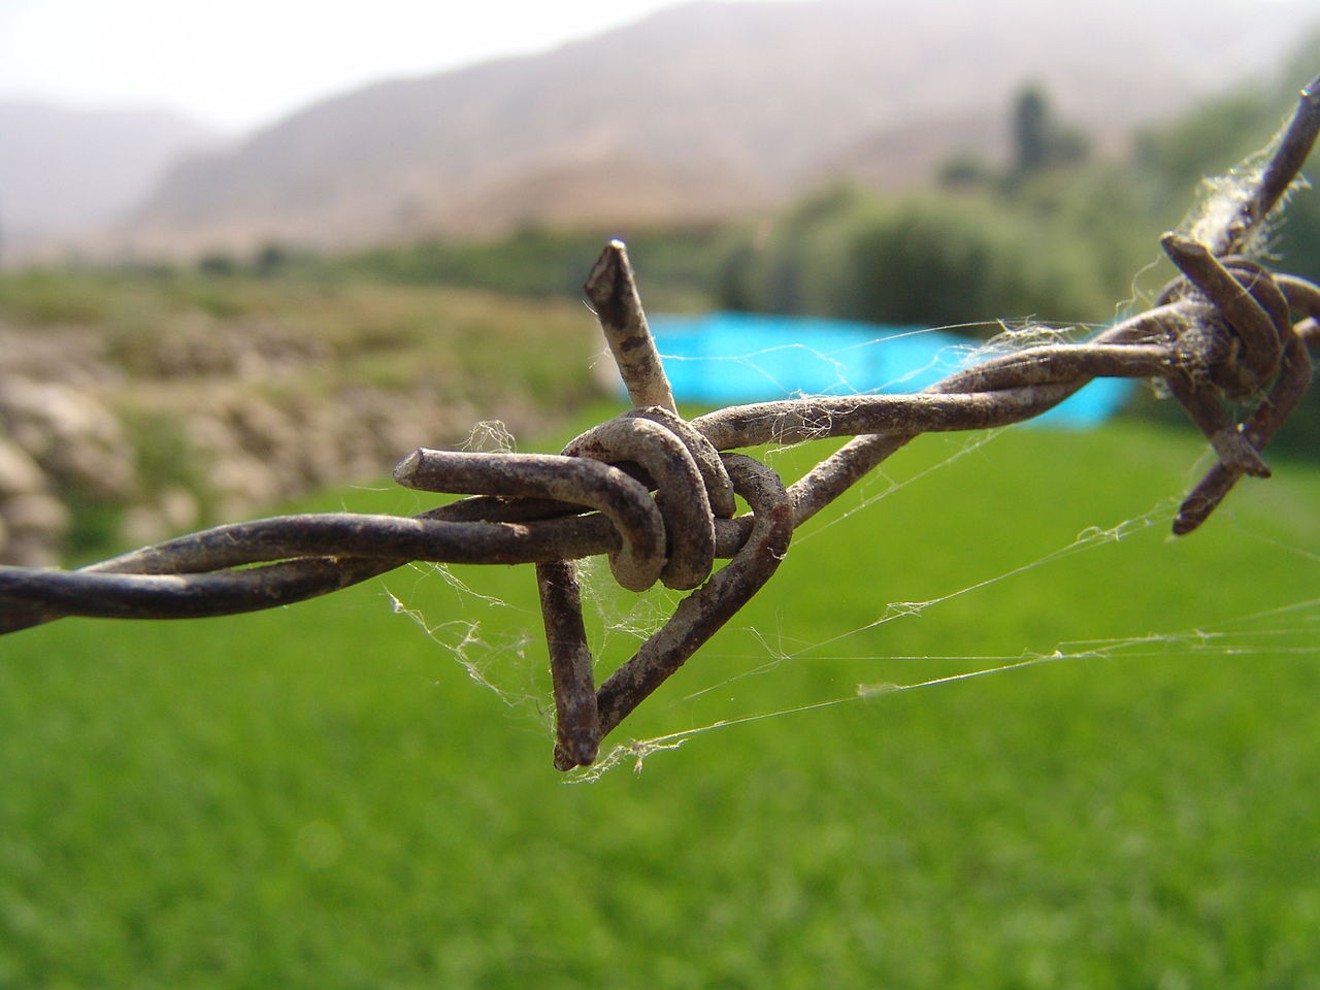 The same barbed wire can be used on white people.